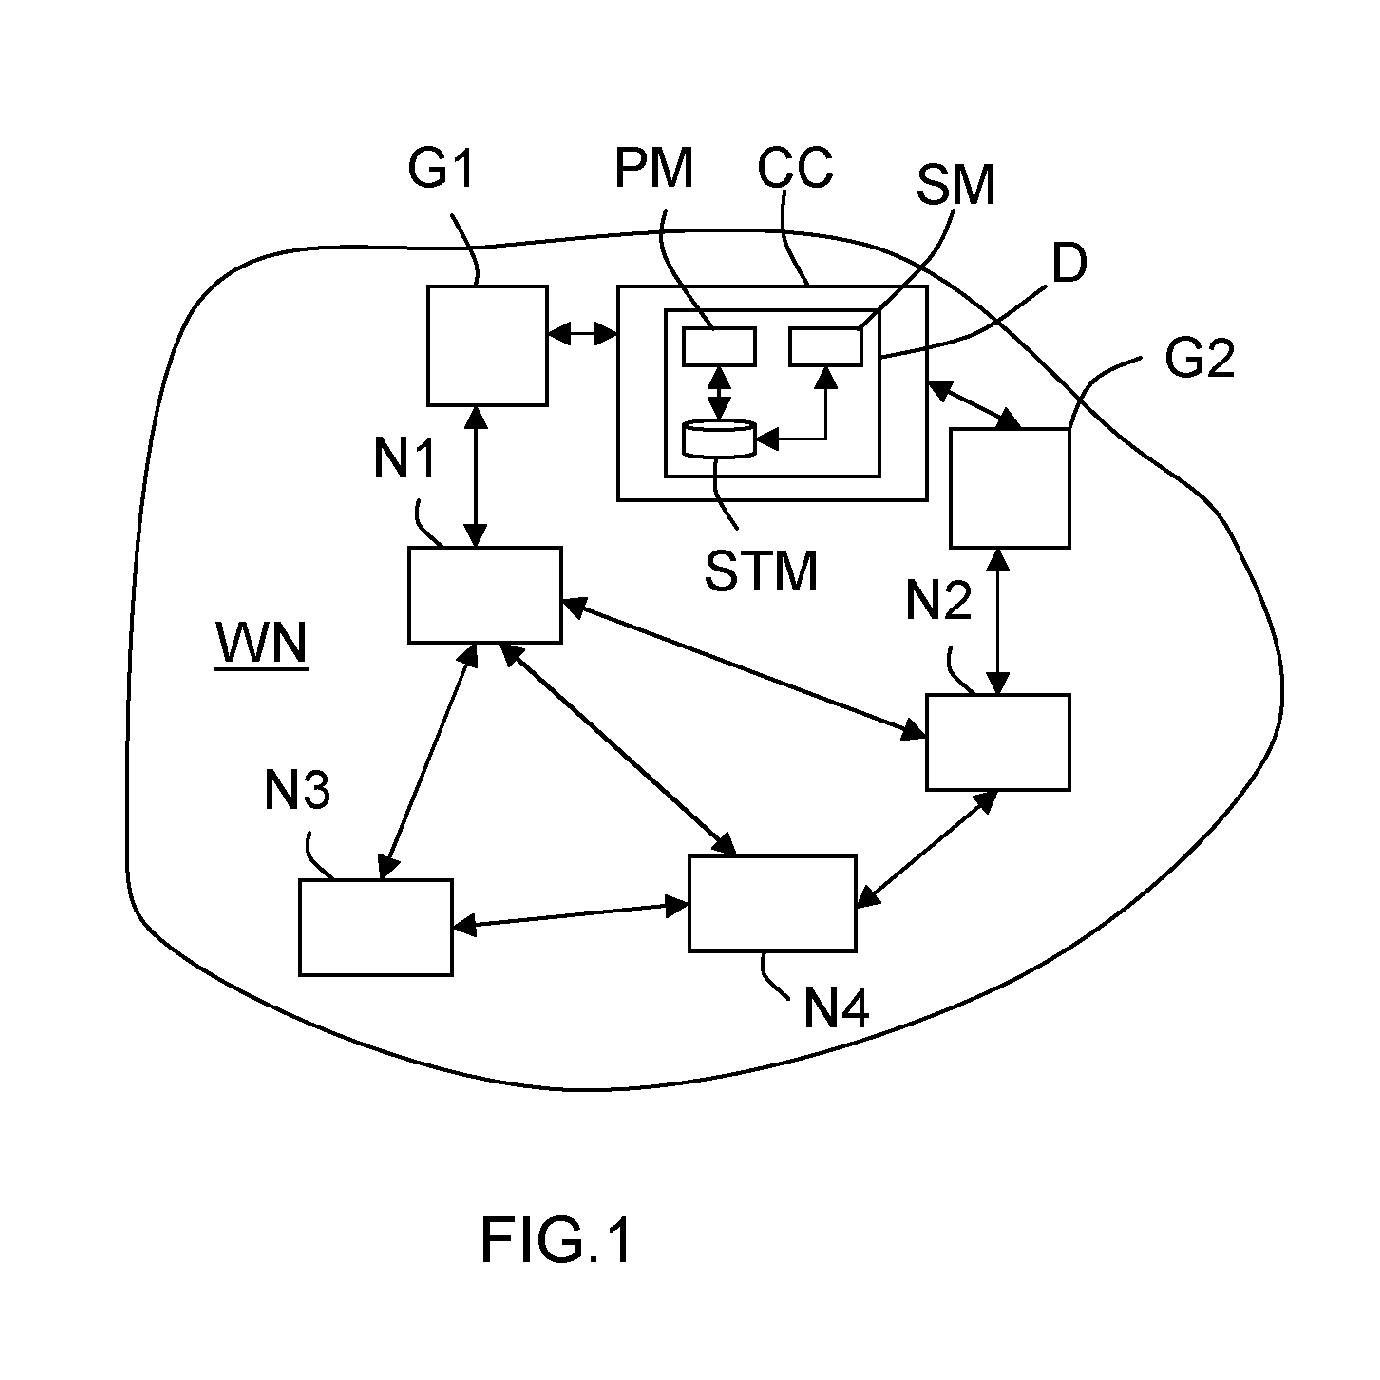 Method and processing device for optimal interference estimation and scheduling in a multi-hop wireless network with centralized control